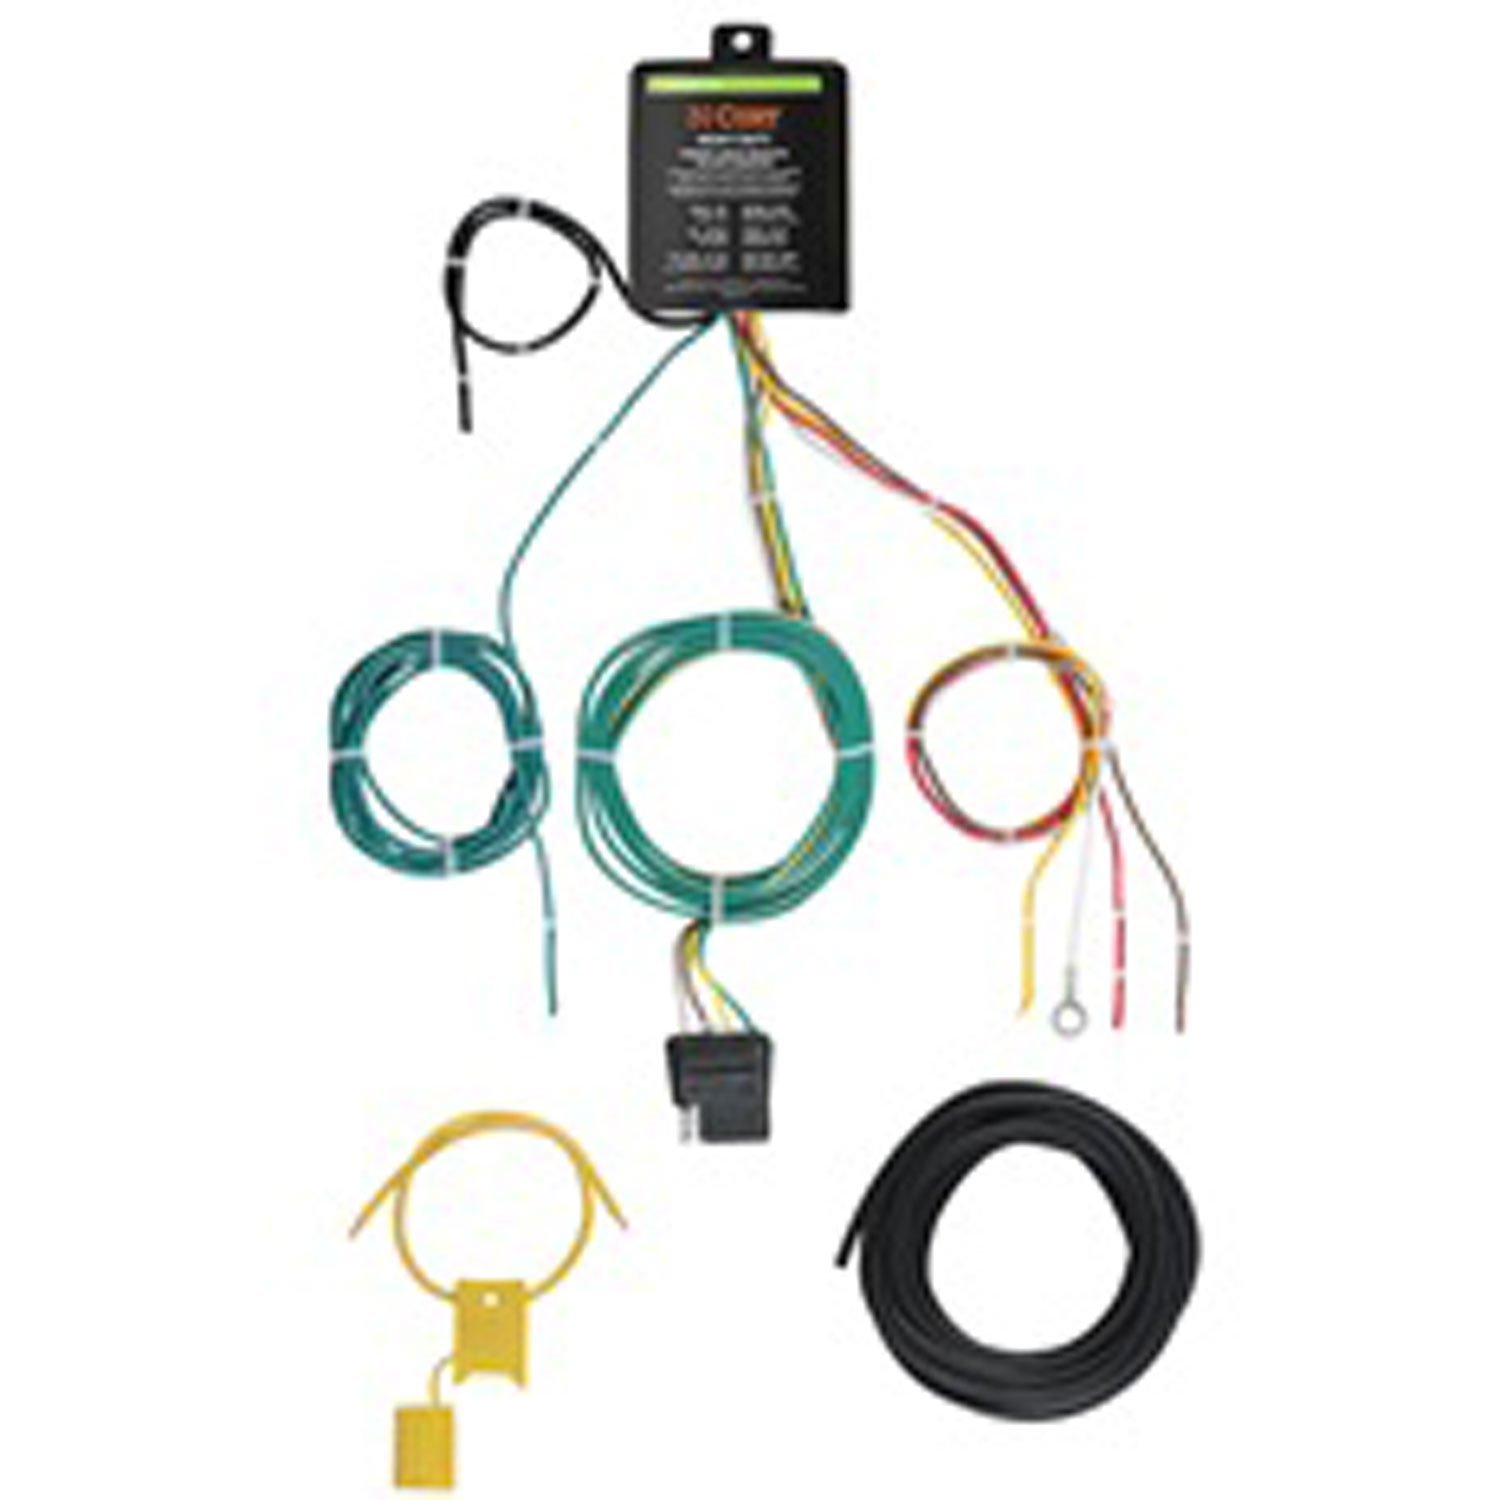 MULTI-FUNCTION TAILLIGHT CONVERTER INCLUDES WIRING KIT